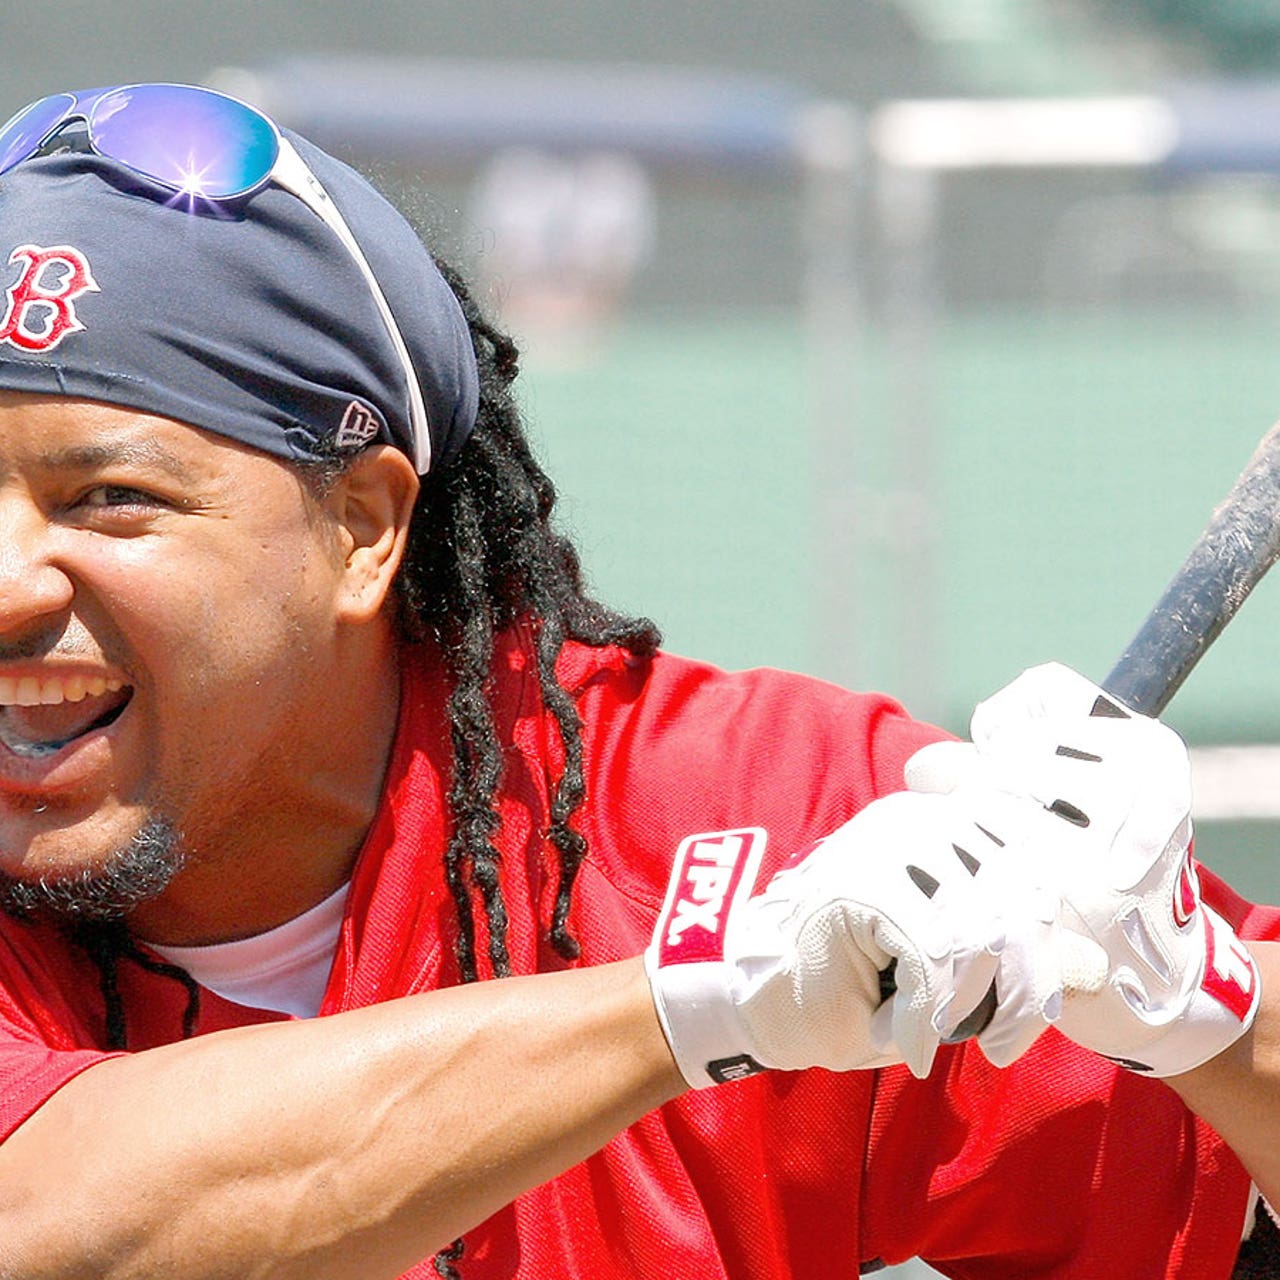 Right at home: Manny Ramirez a blast in Fenway debut - The Boston